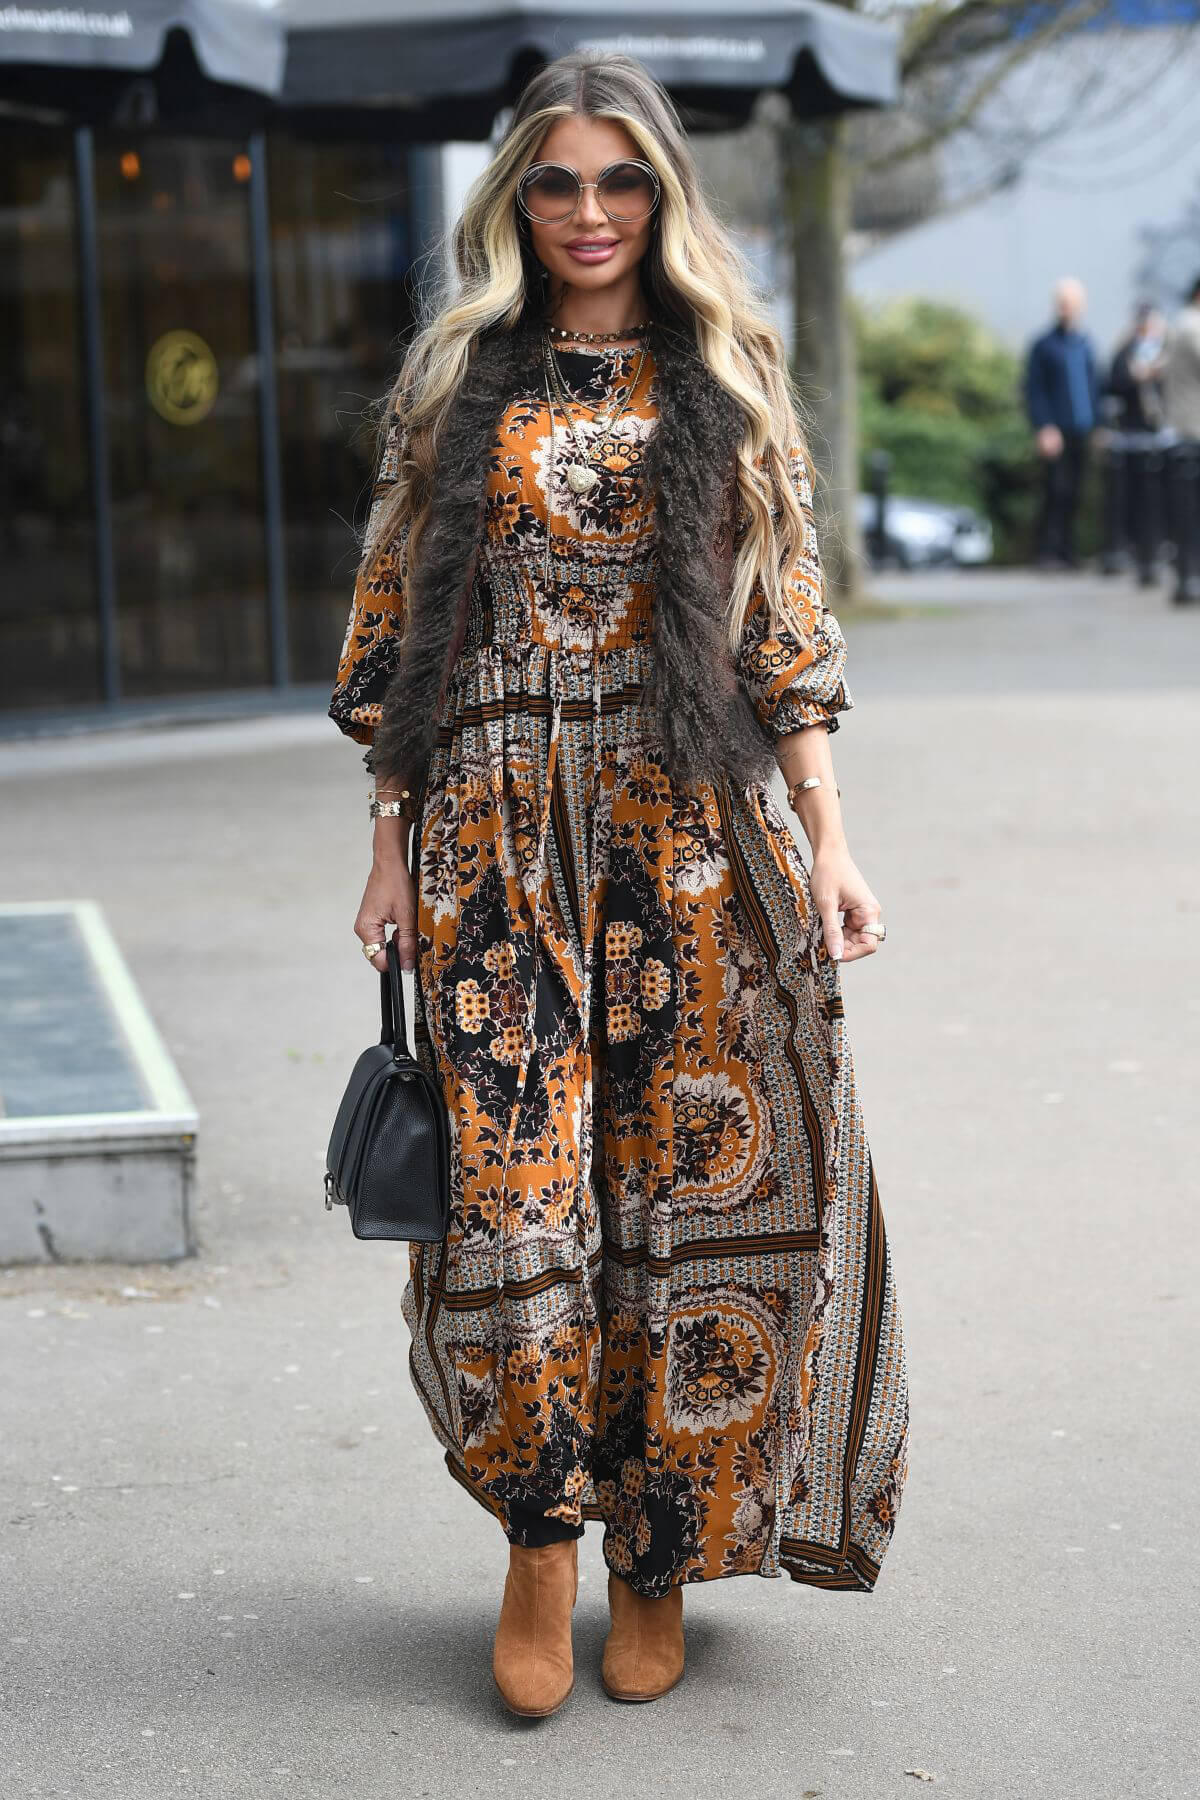 Chloe Sims is Seen on the Set of The Only Way is Essex 03/23/2021